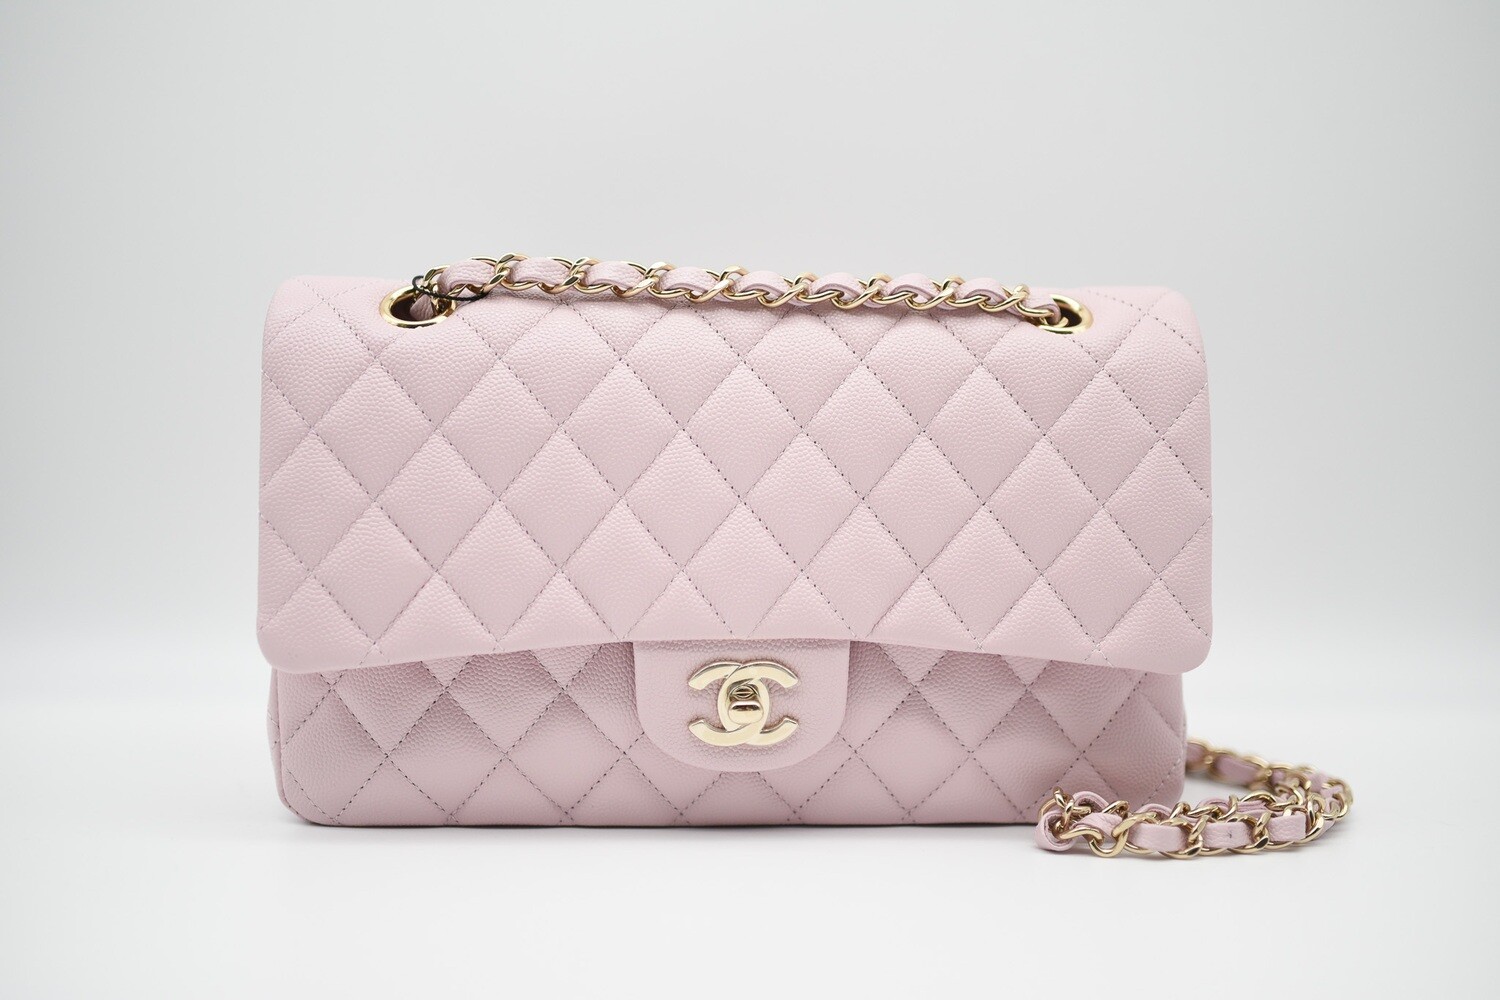 Chanel Classic Medium Flap, 21S Pink with Gold Hardware, New in Box GA006